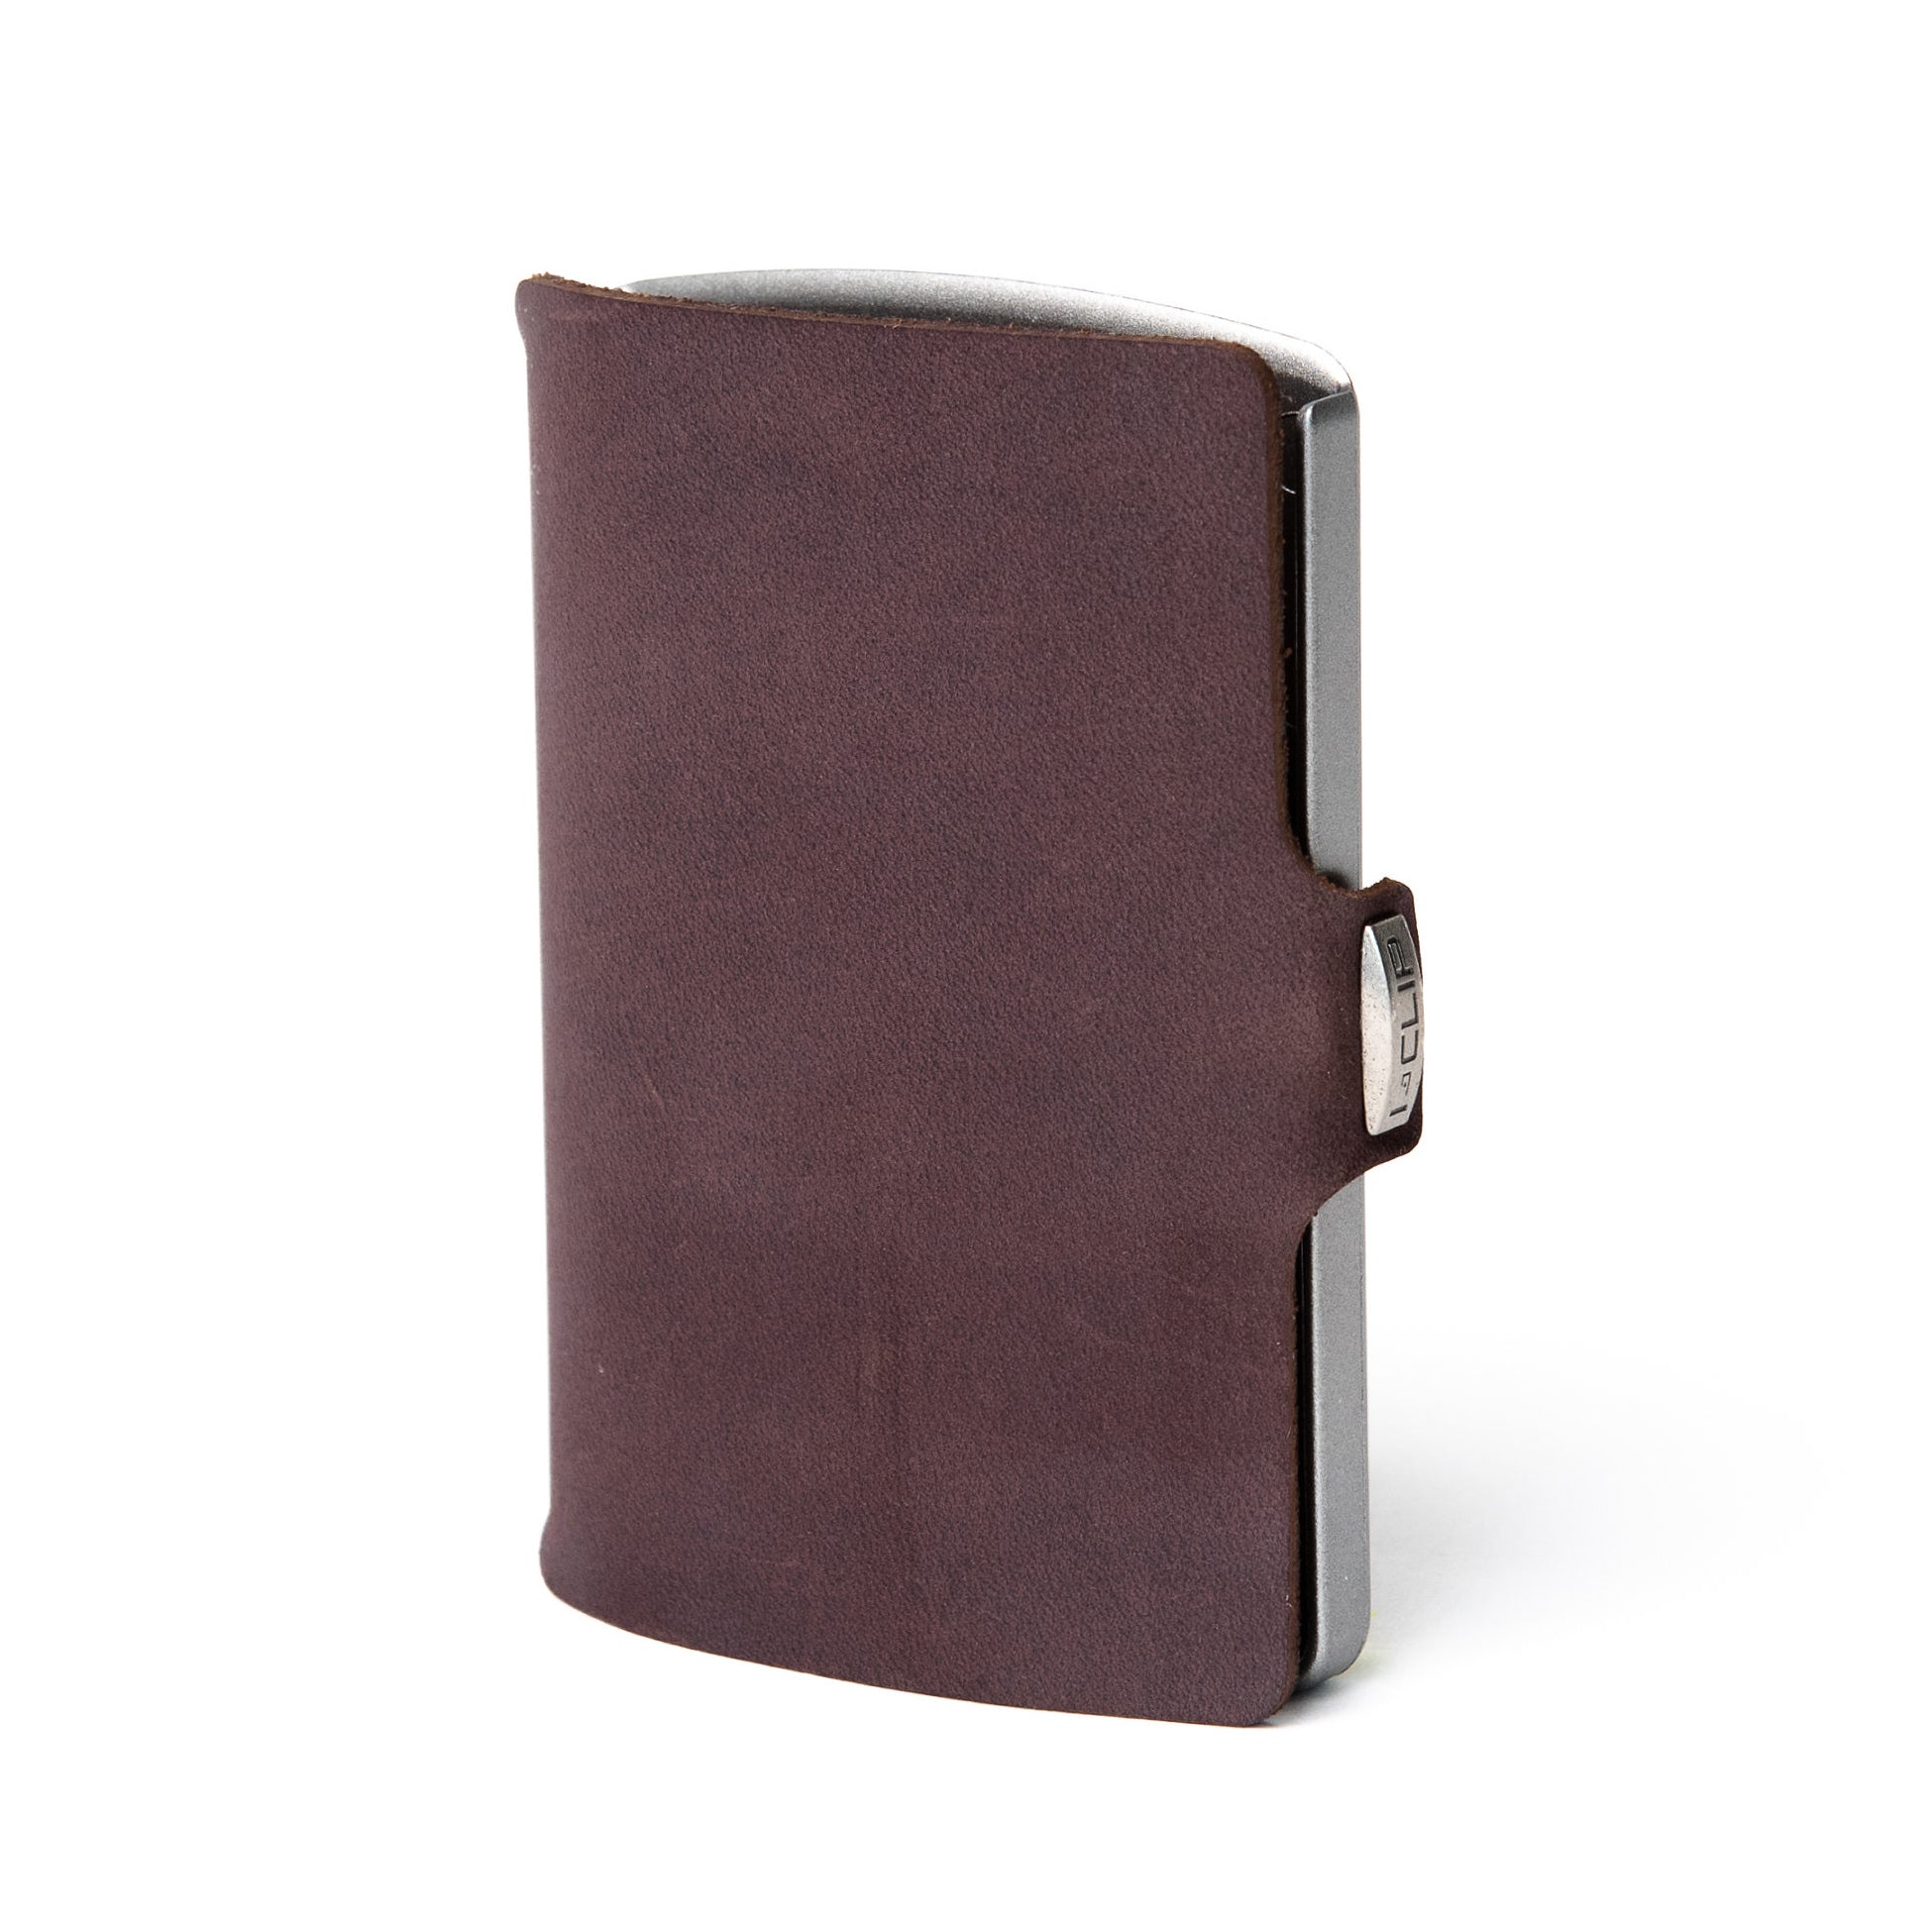 Soft Touch Leather - Brown / Metallic Gray Frame - I-CLIP 